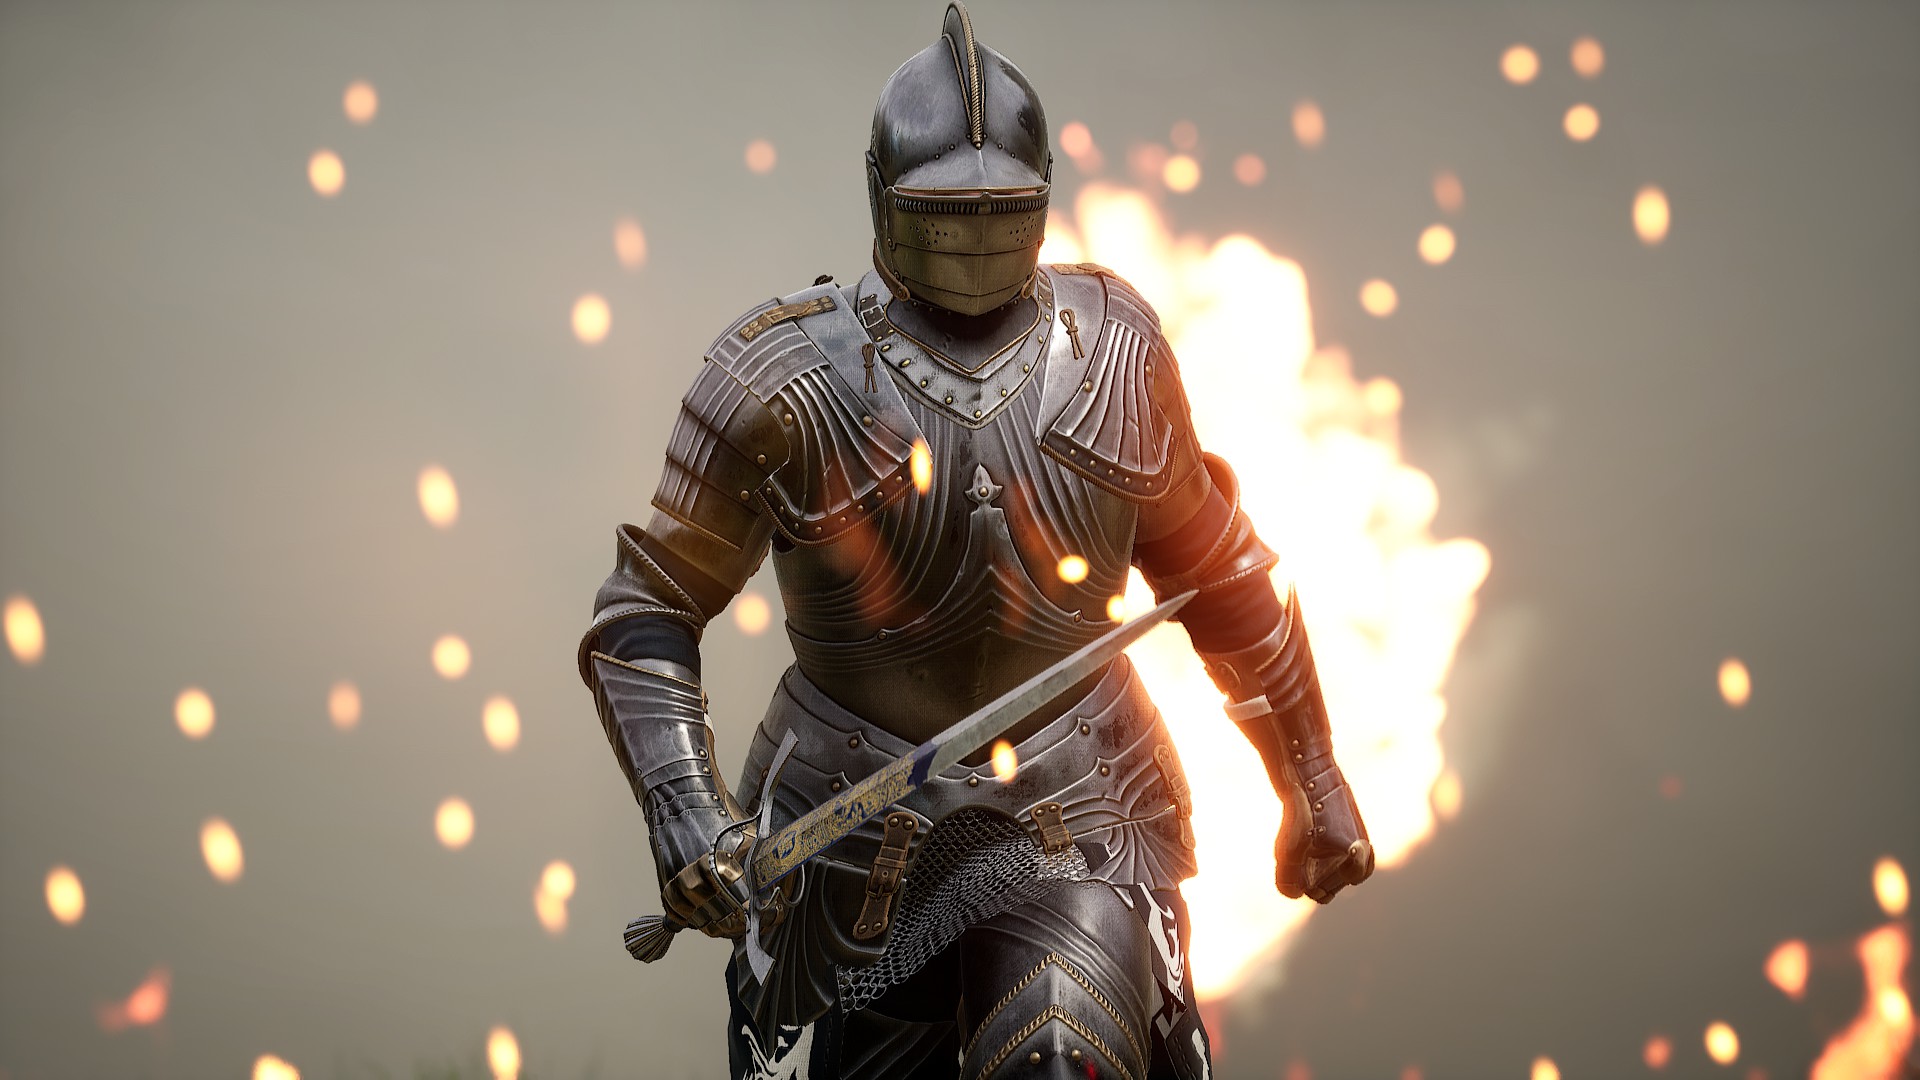 Steam Community :: Guide :: Guide Complet Mordhau France